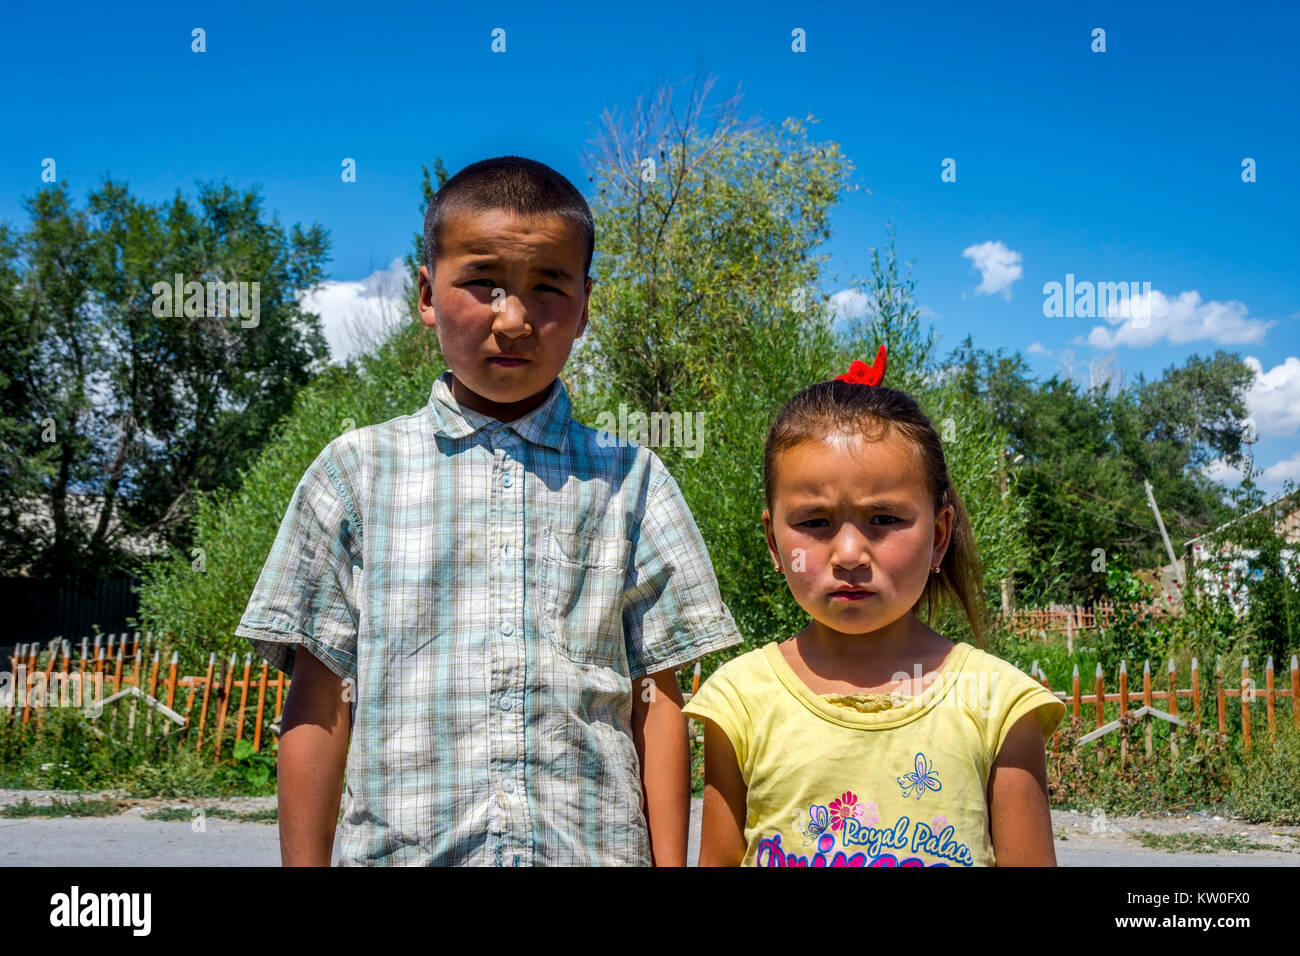 UGUT, KYRGYZSTAN - AUGUST 16: Siblings, brother and a sister posing with serious facial expression. Ugut is a remote village in Kyrgyzstan. August 201 Stock Photo